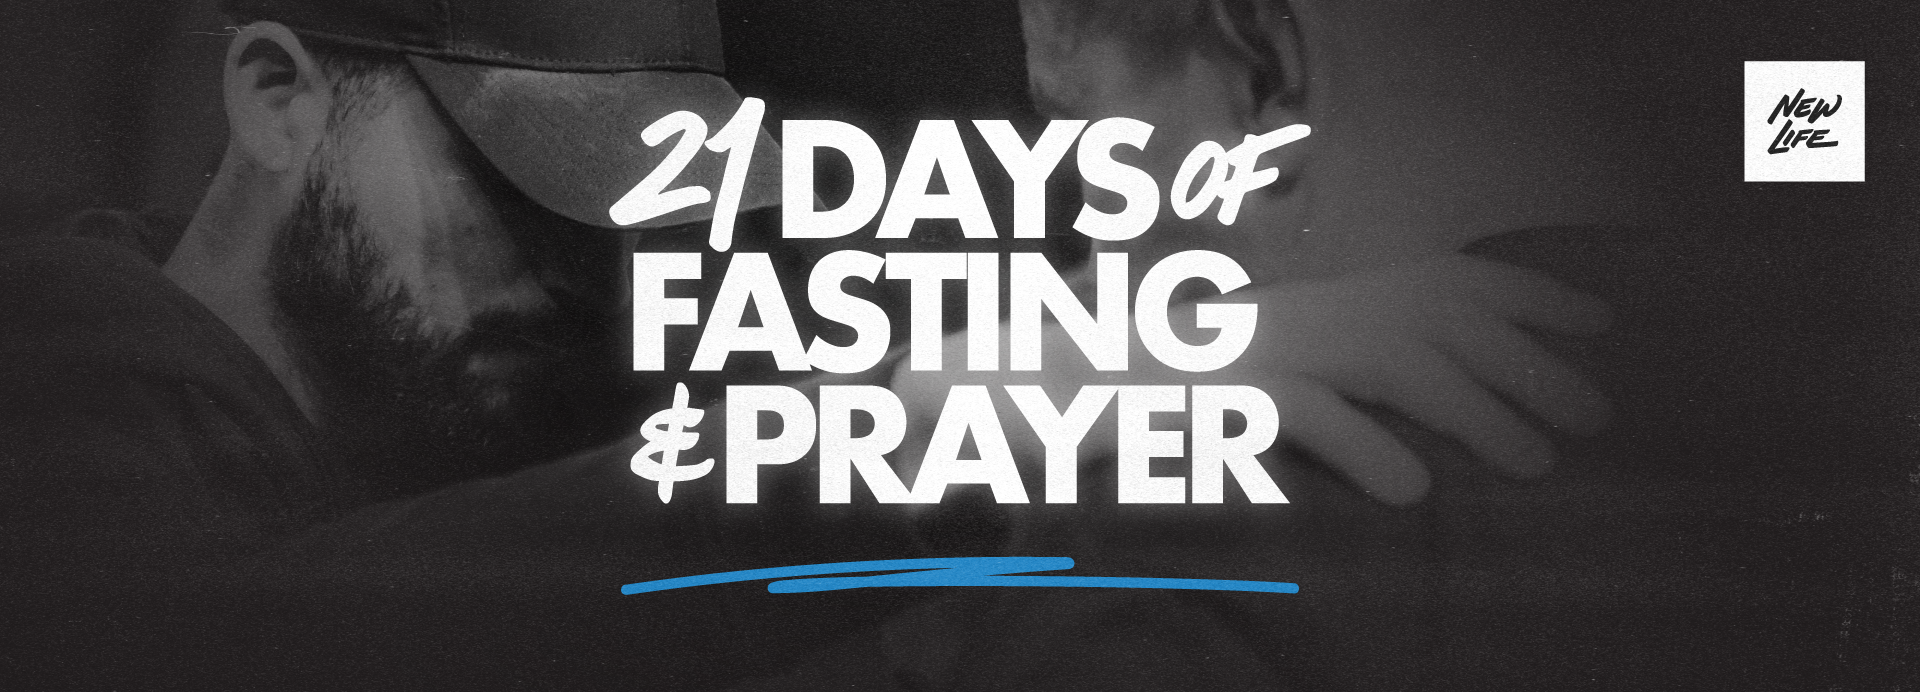 21 Days of Fasting and Prayer-13